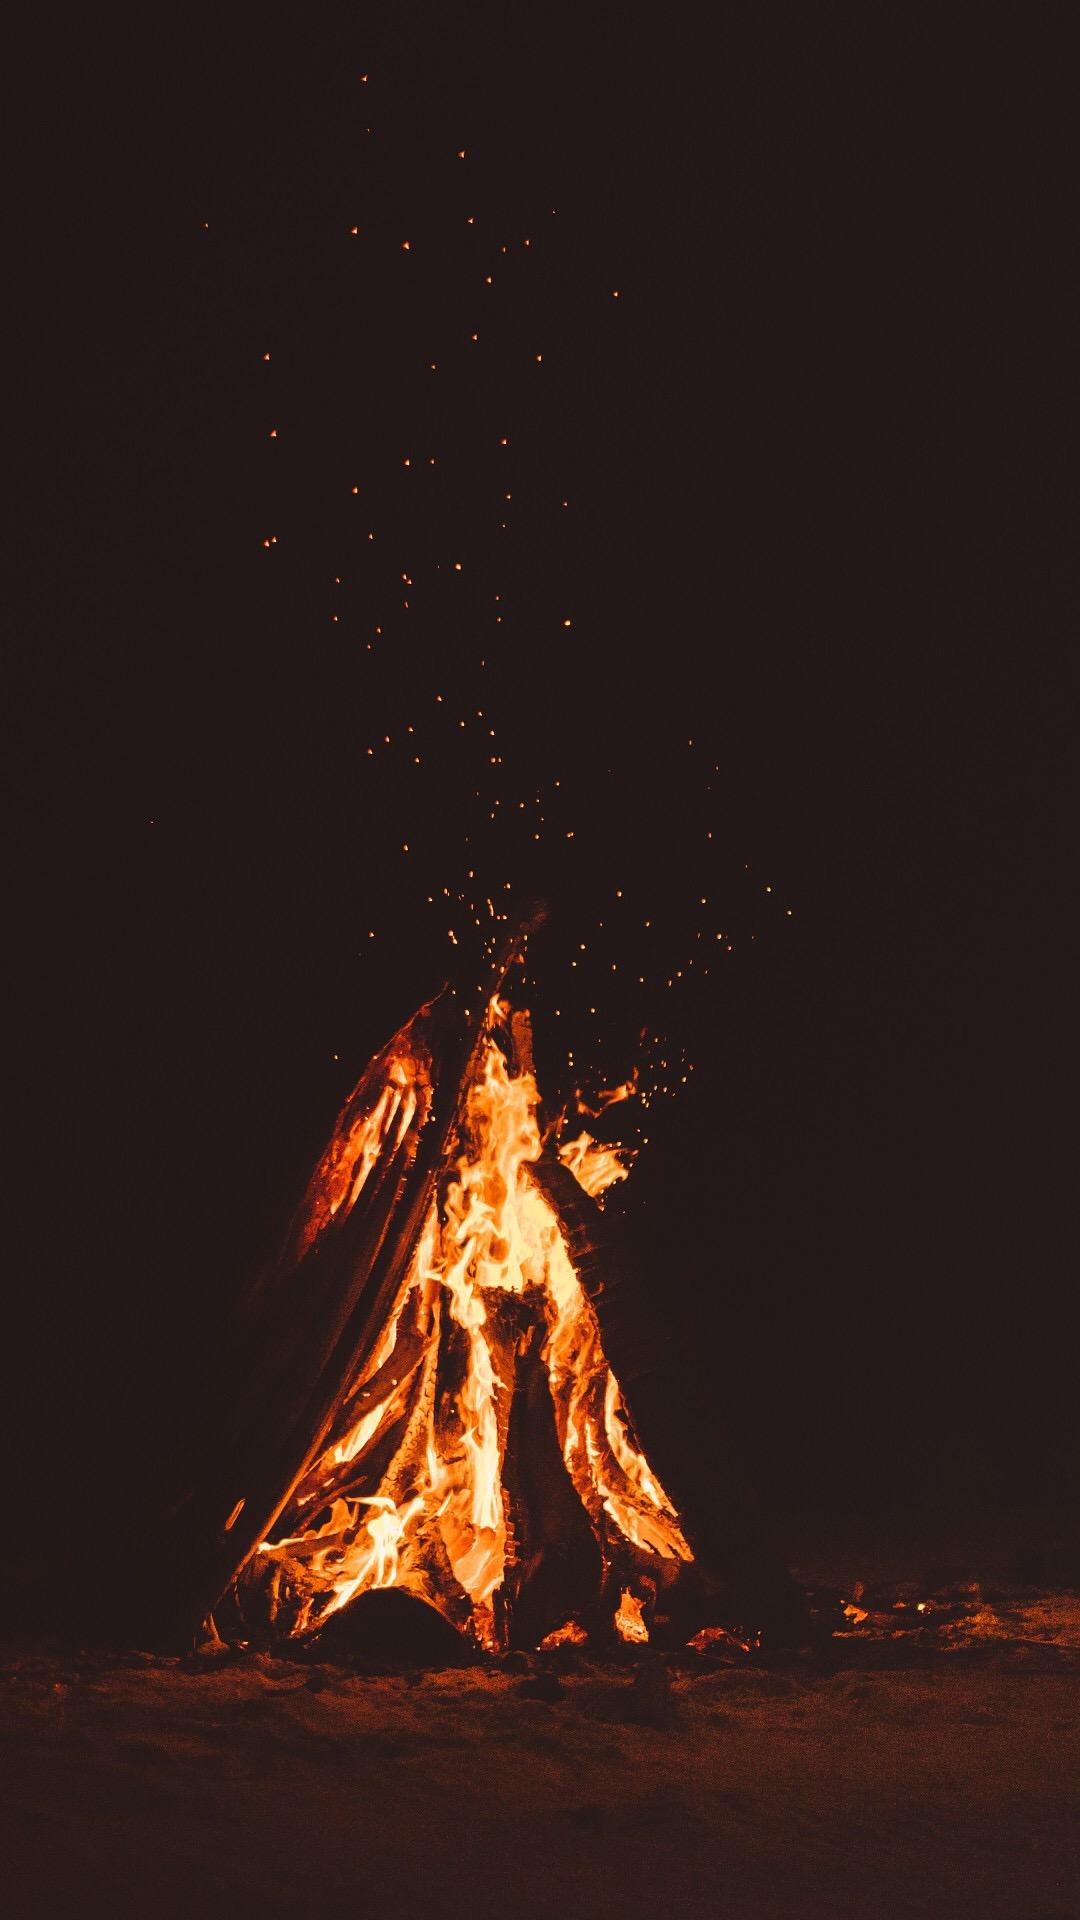 Group of Campfire Background Image Wallpaper